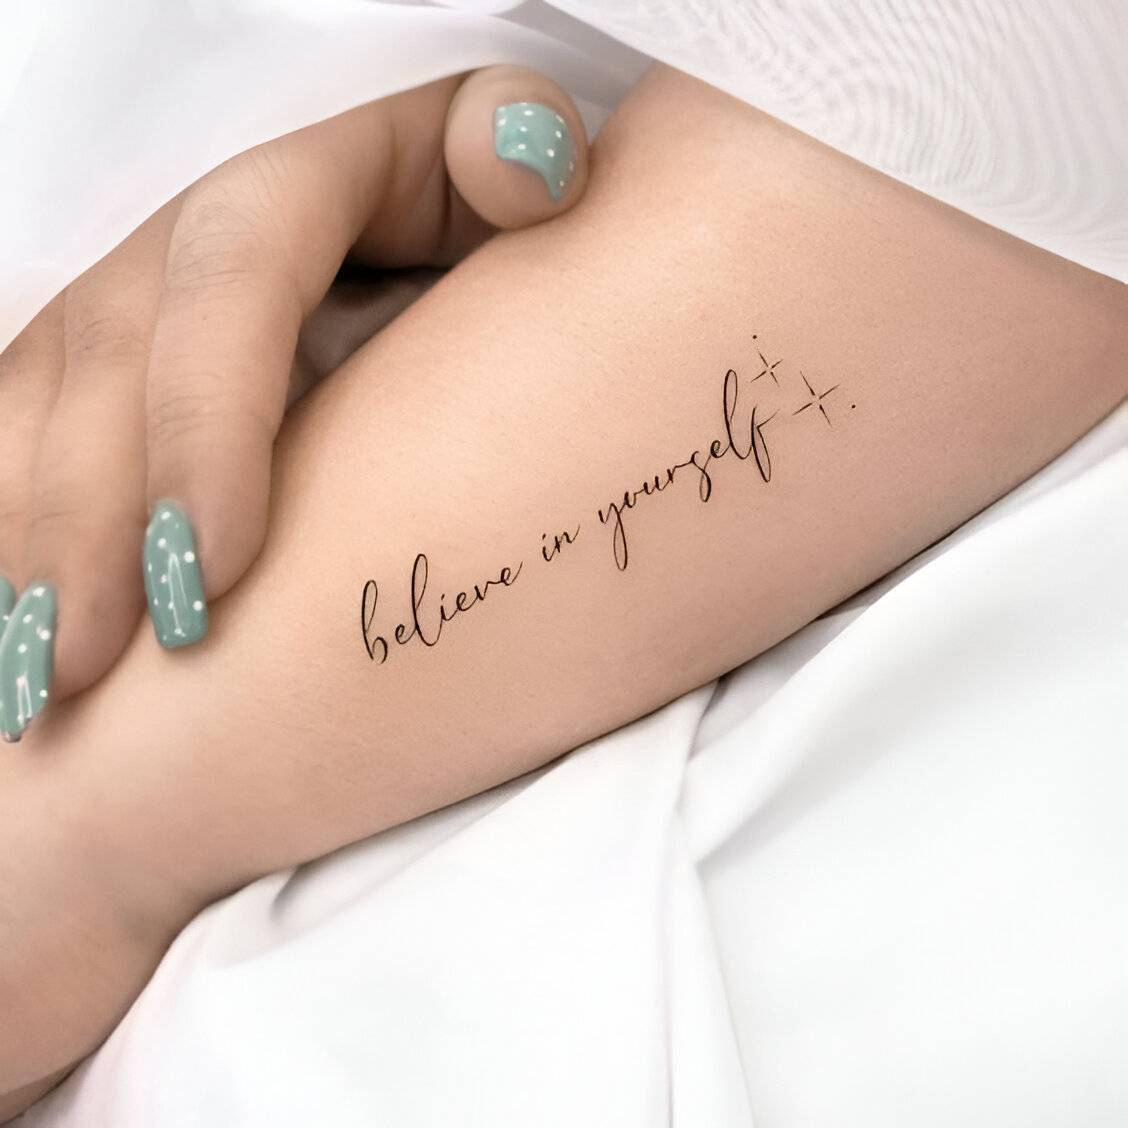 22 Meaningful Quote Tattoos To Bring Out Your Feminine Power - 169